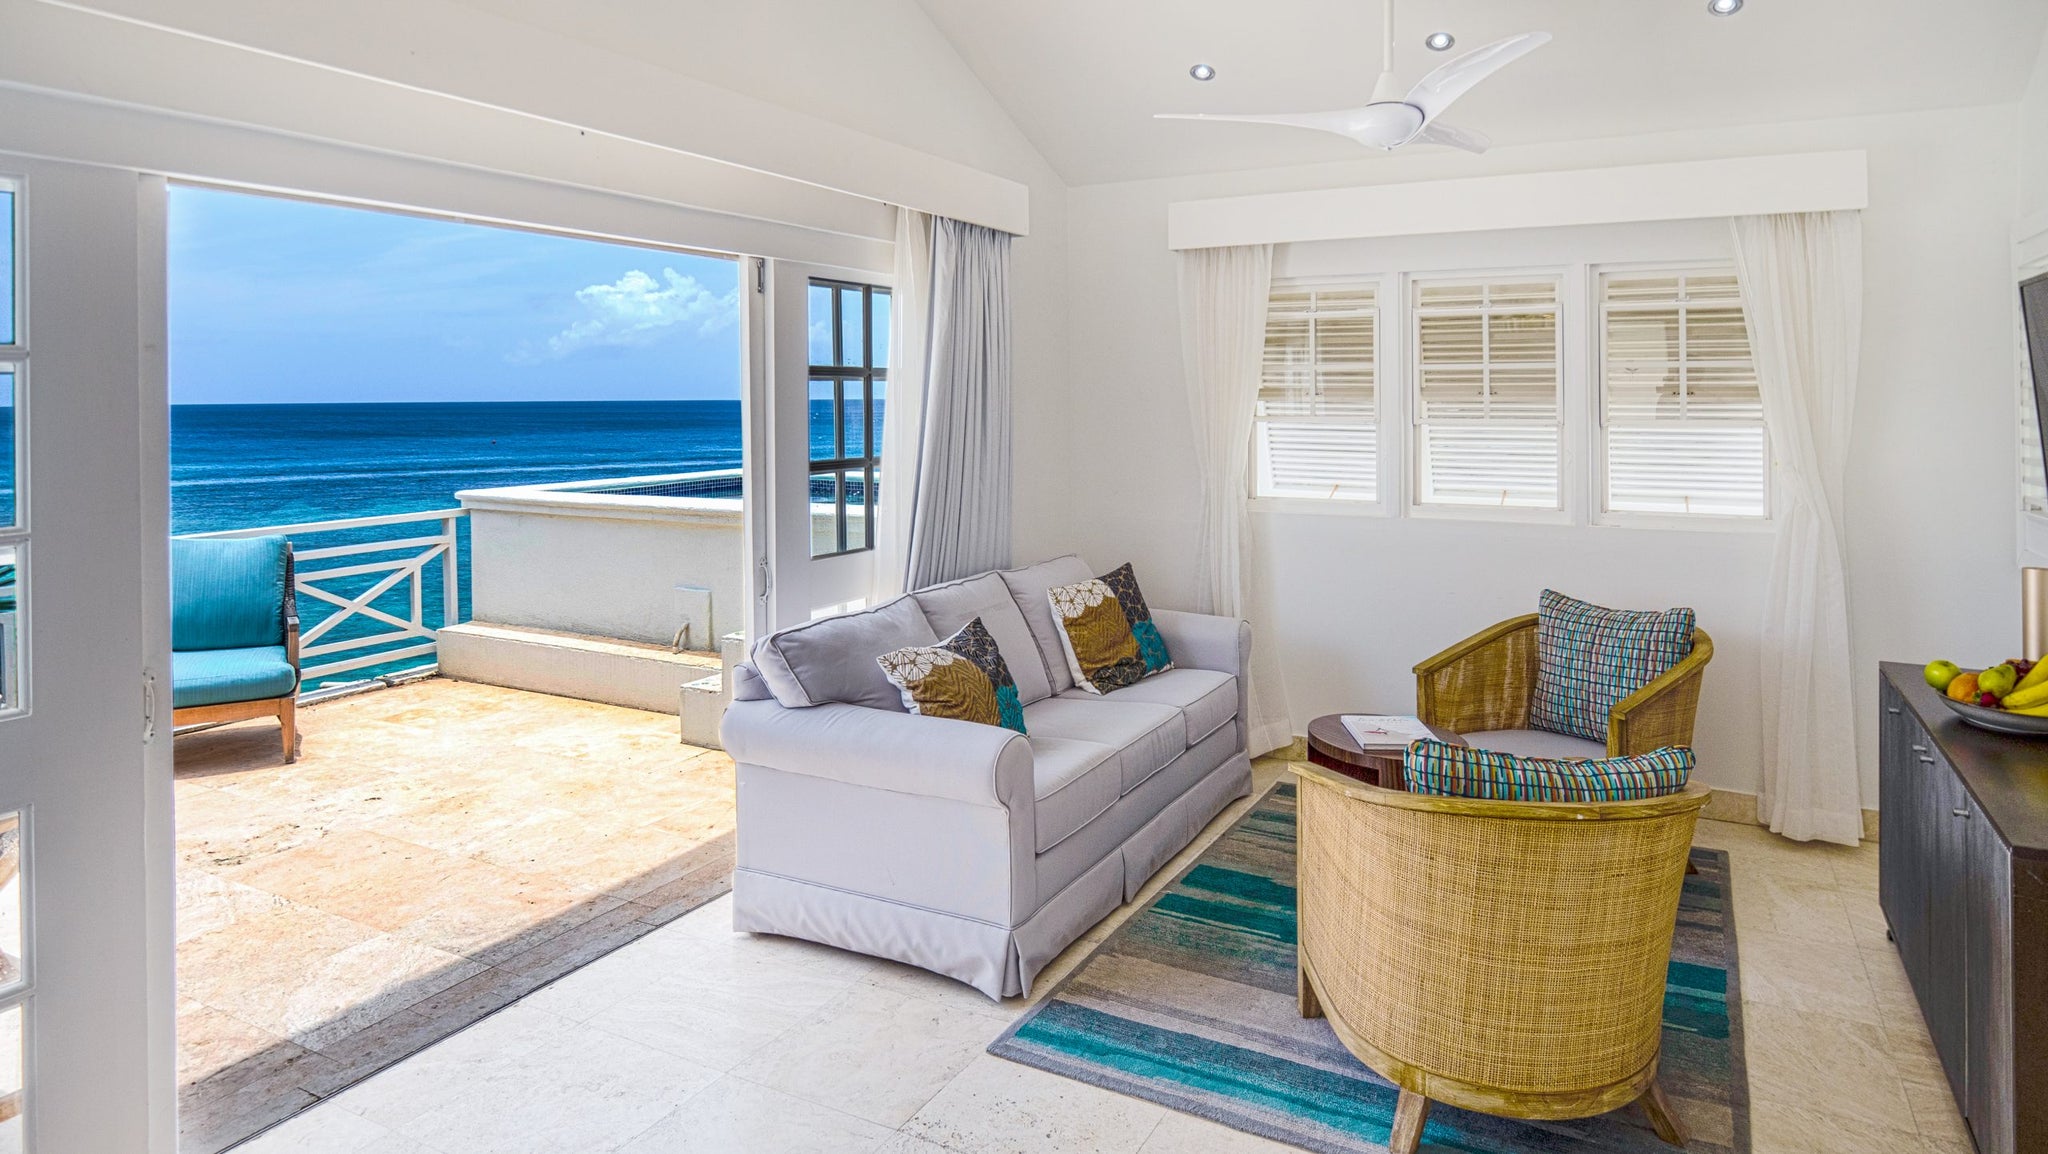 2 Barbados Resorts Reopening As Marriott All Inclusives The Points Guy